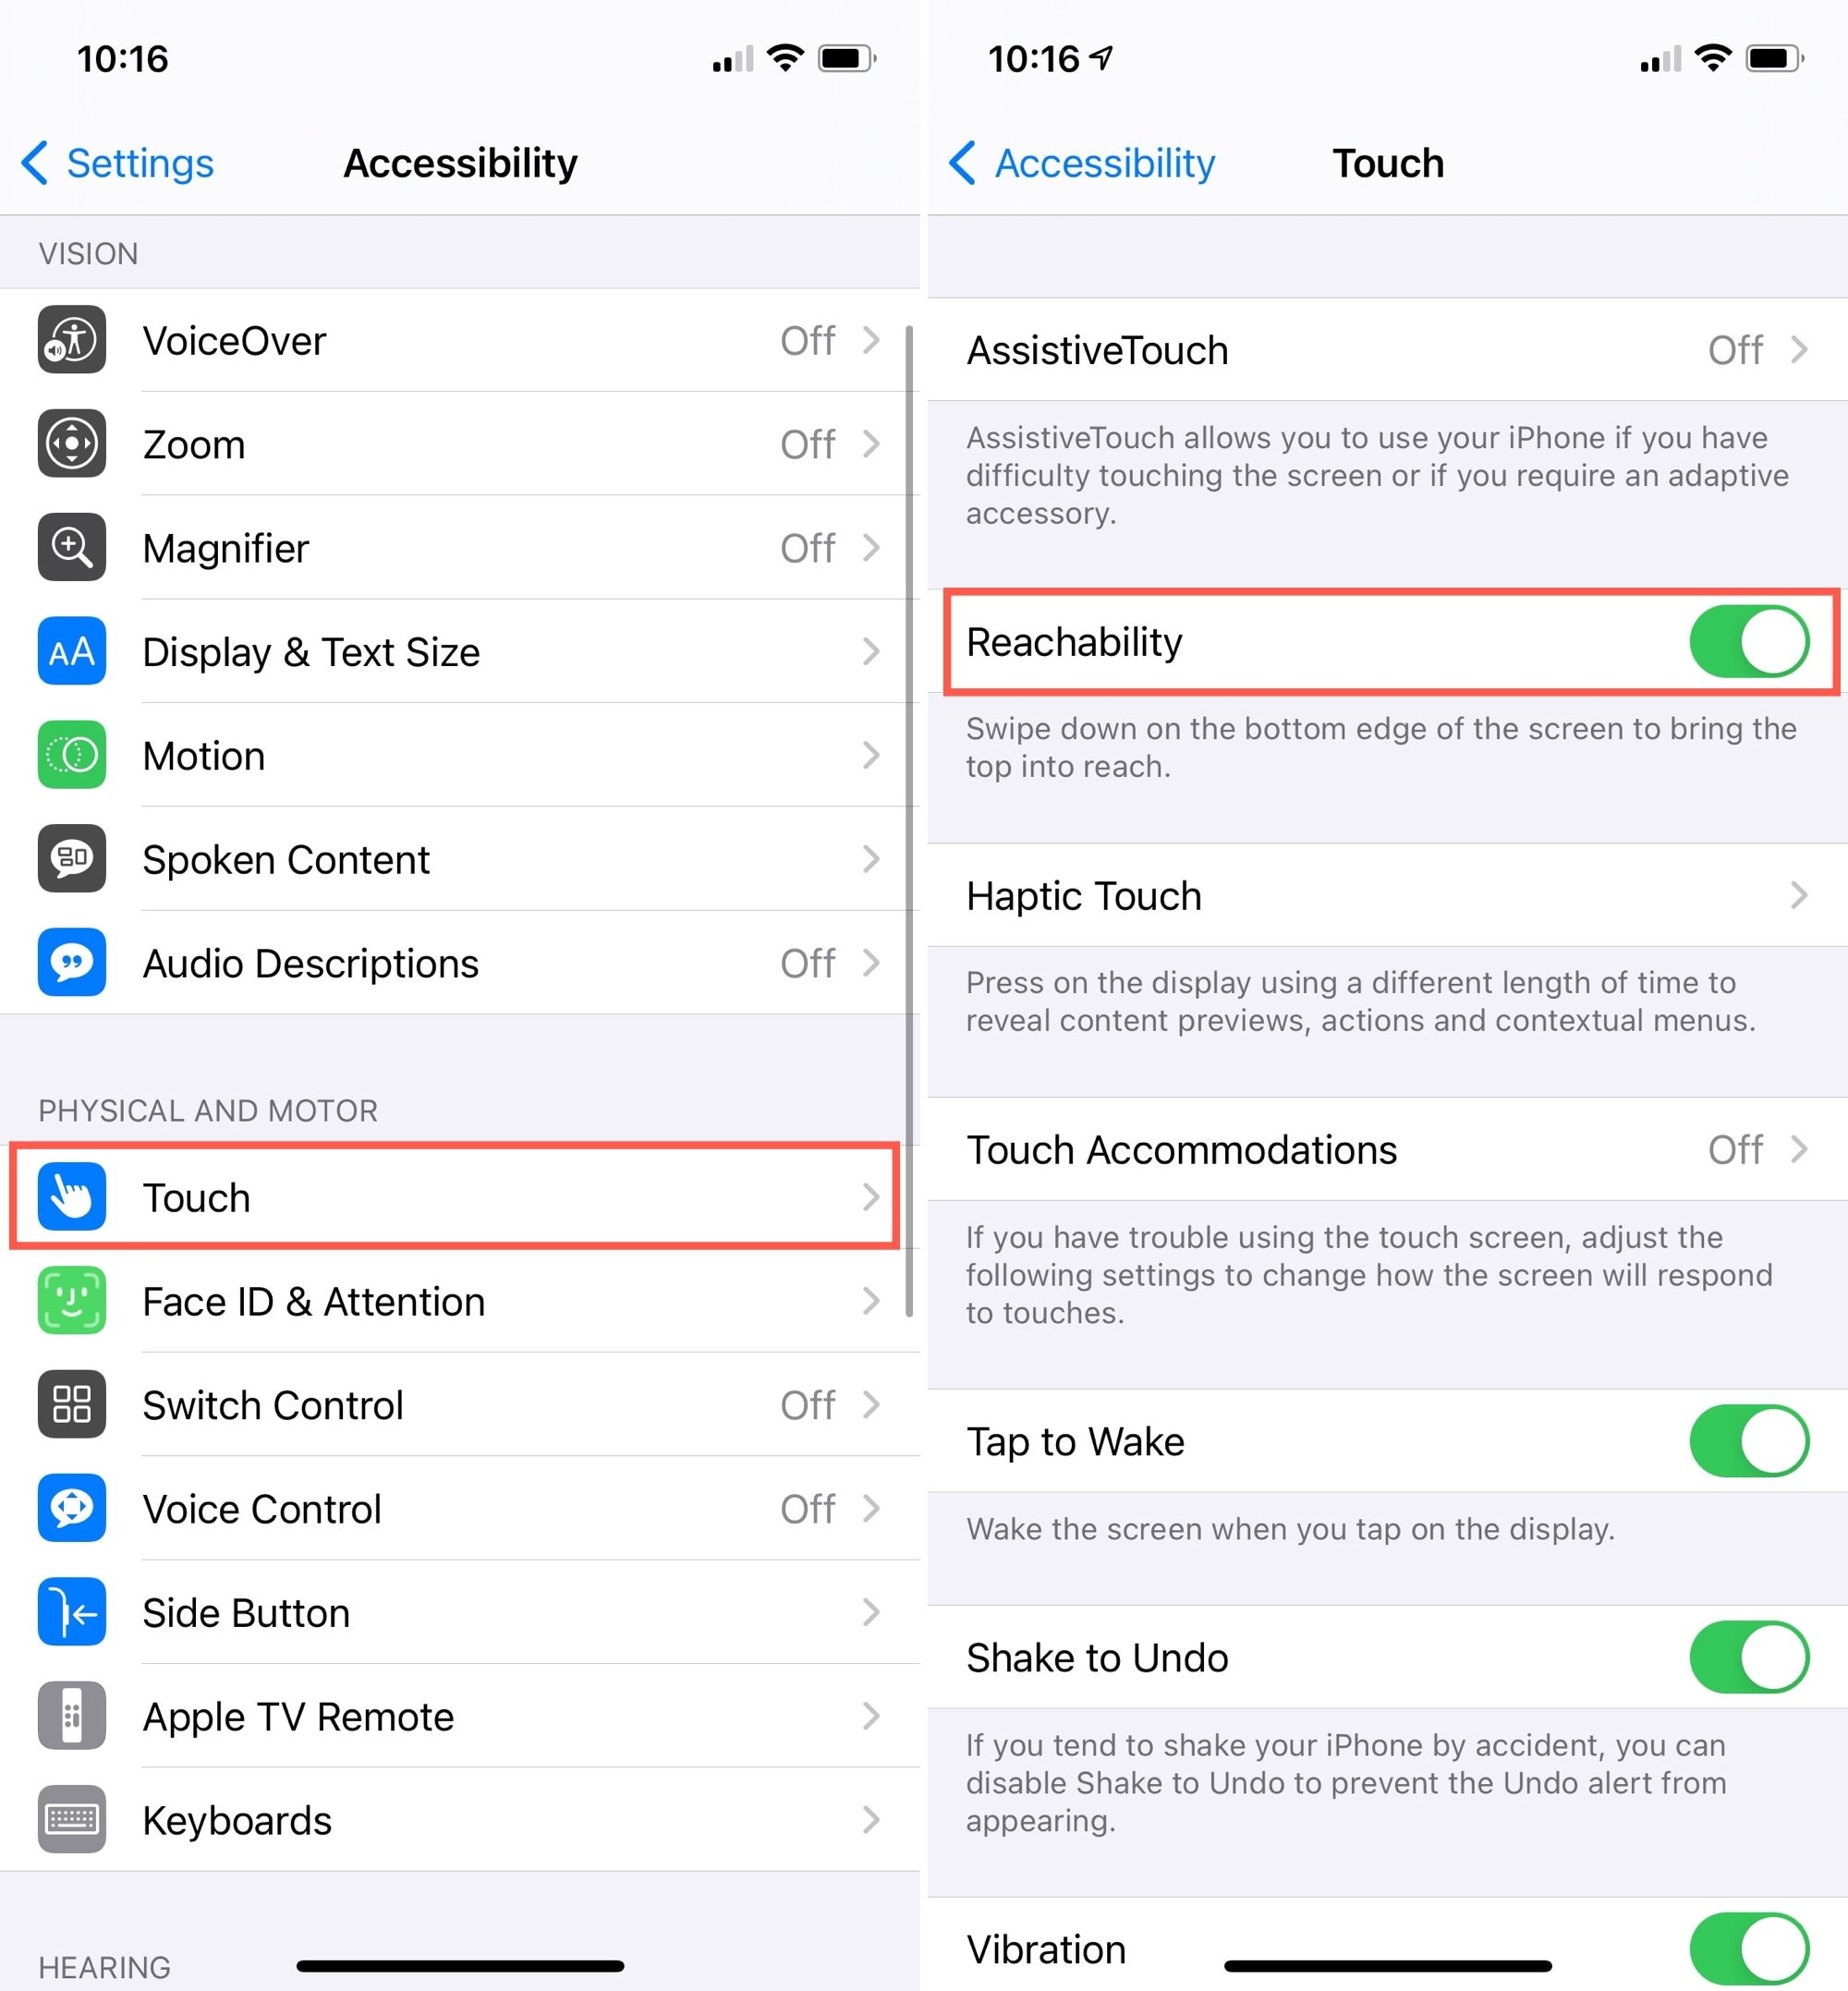 Settings, Accessibility, Touch, Reachability